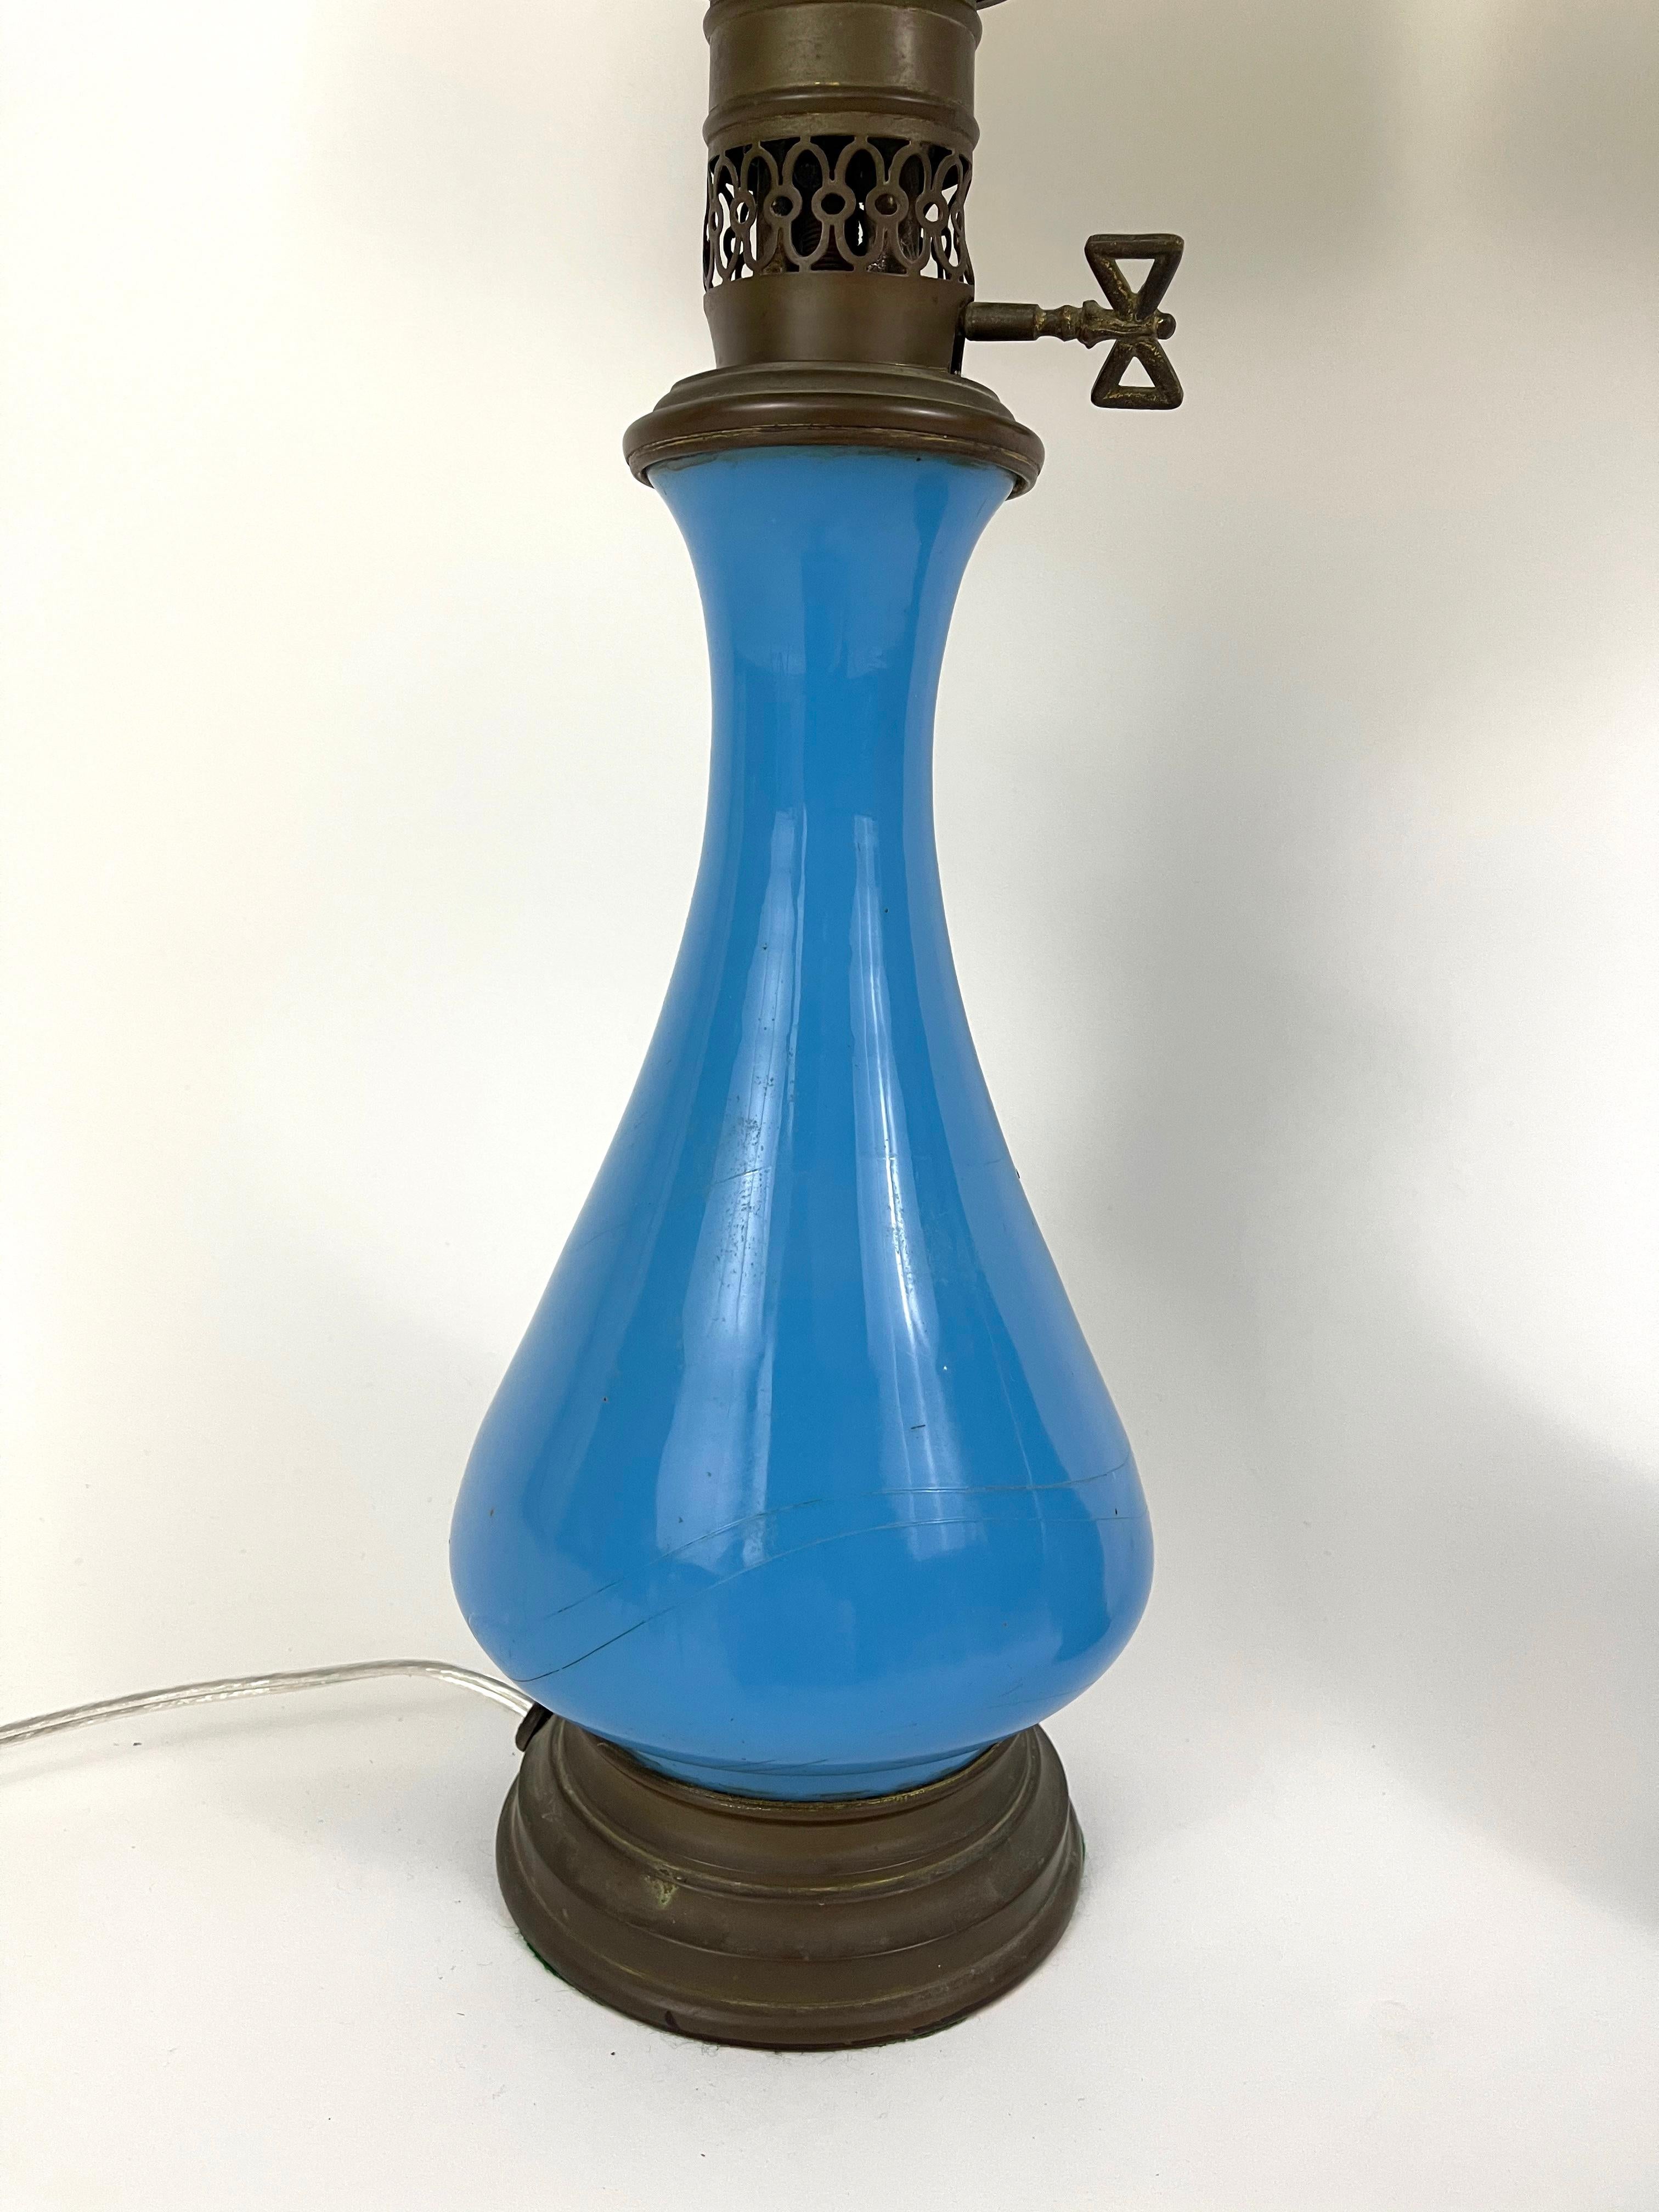 A pair of 19th century French blue opaline glass oil lamps, electrified and newly re-wired, with new shades. Wonderful, vibrant color.

Measures: Height 25 1/2